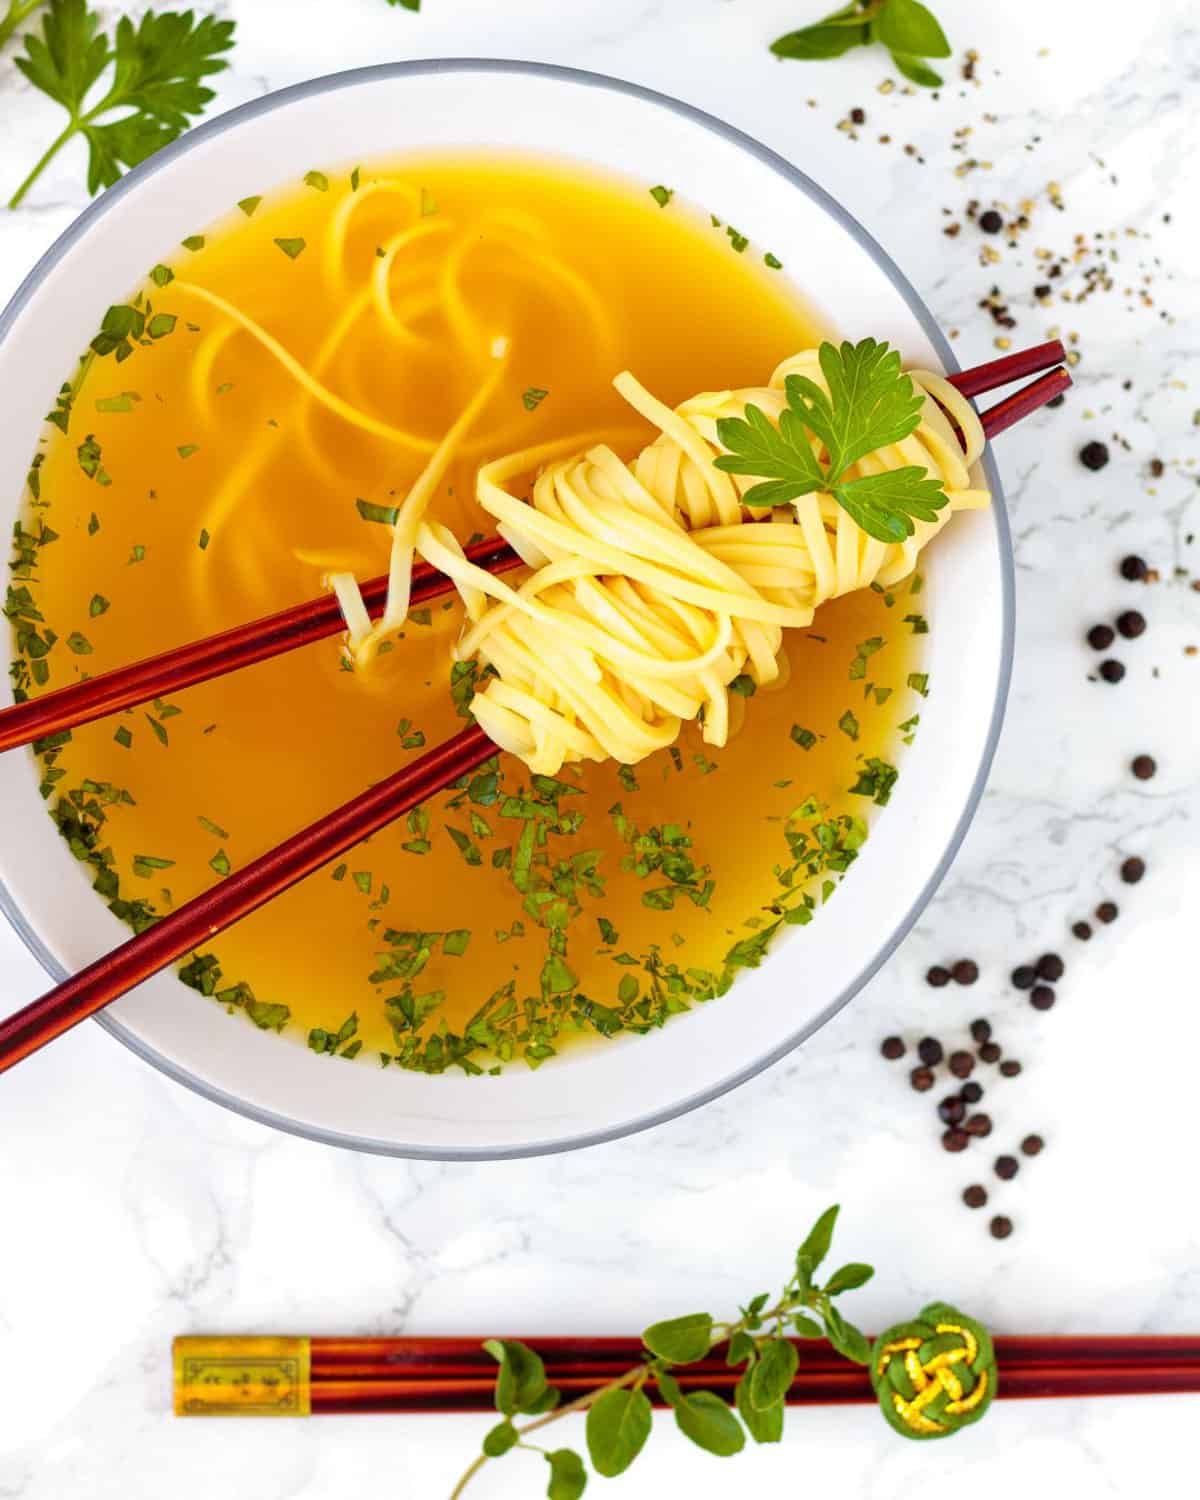 Tasty turmeric broth with noodles is an immunity boost.